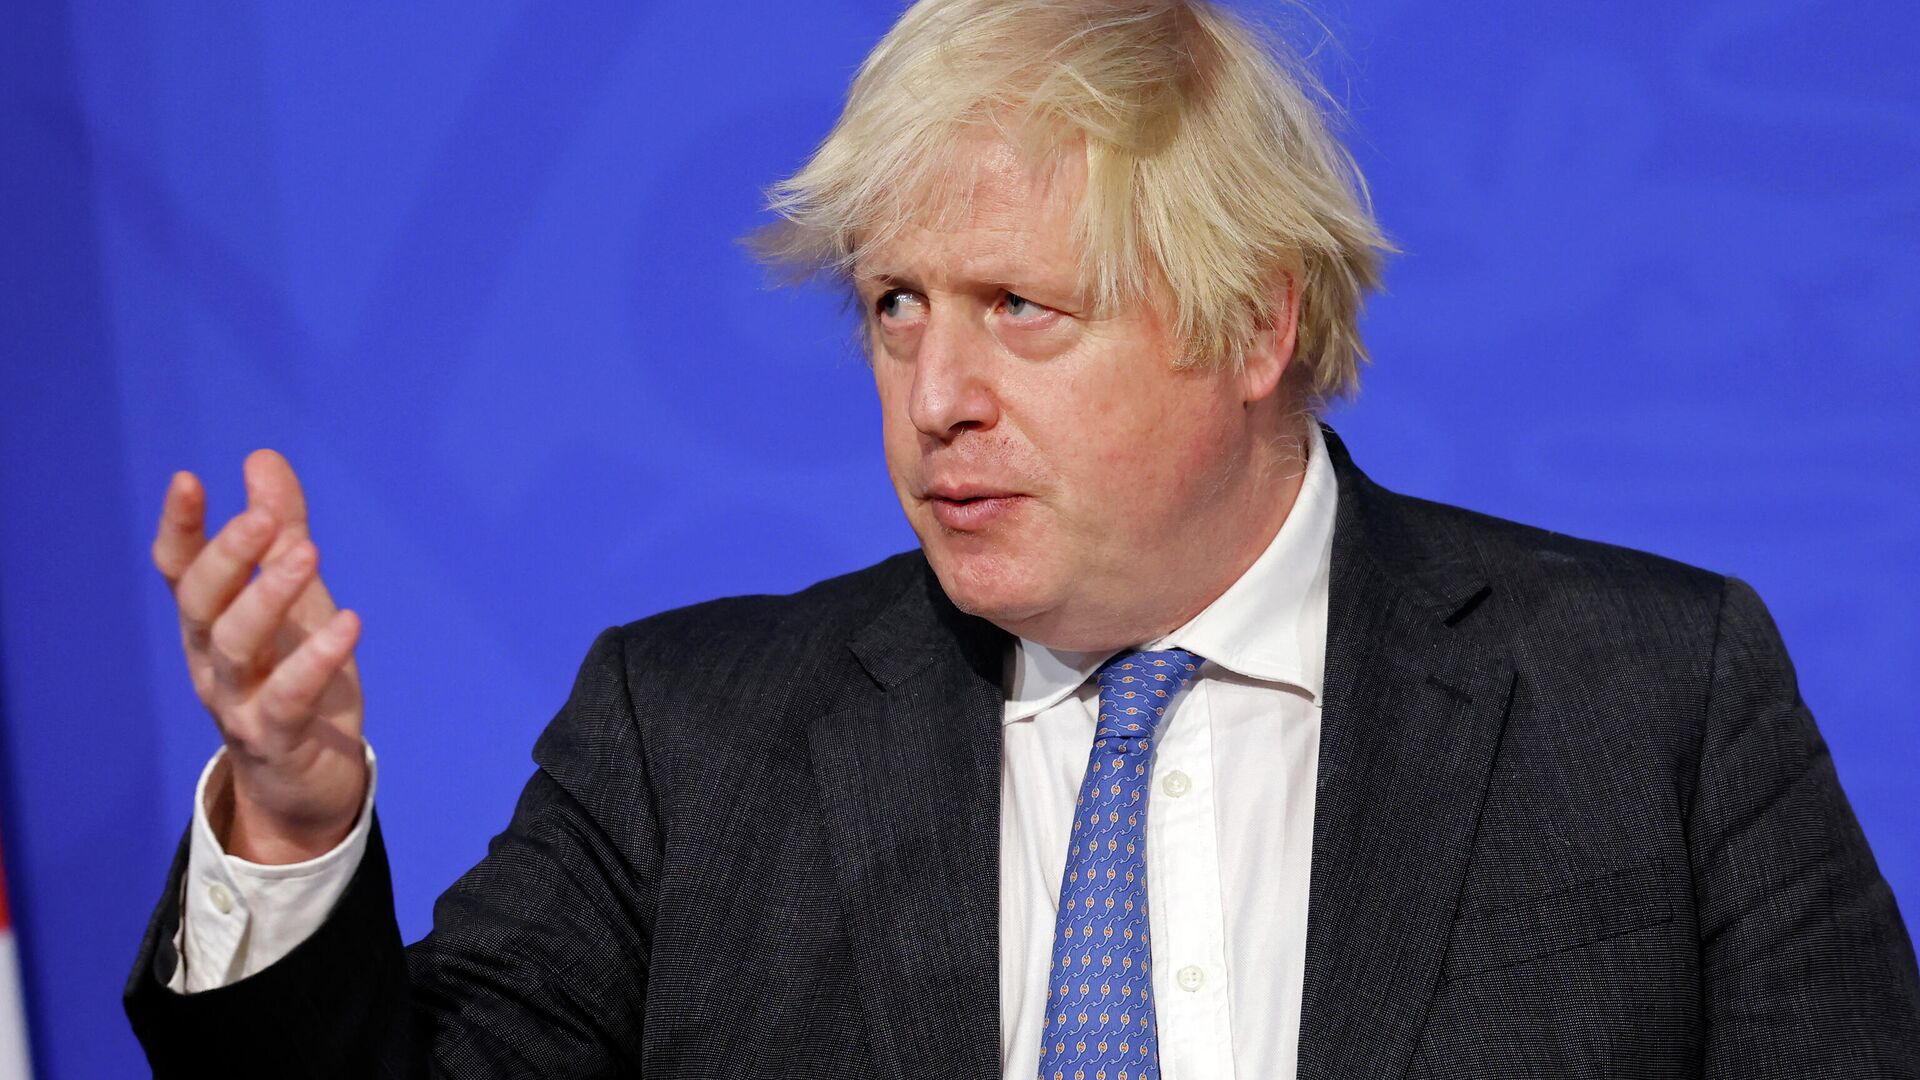 Britain's Prime Minister Boris Johnson speaks at a press conference to update the nation on the Covid-19 booster vaccine program in the Downing Street briefing room in central London on December 15, 2021 - Sputnik International, 1920, 16.01.2022